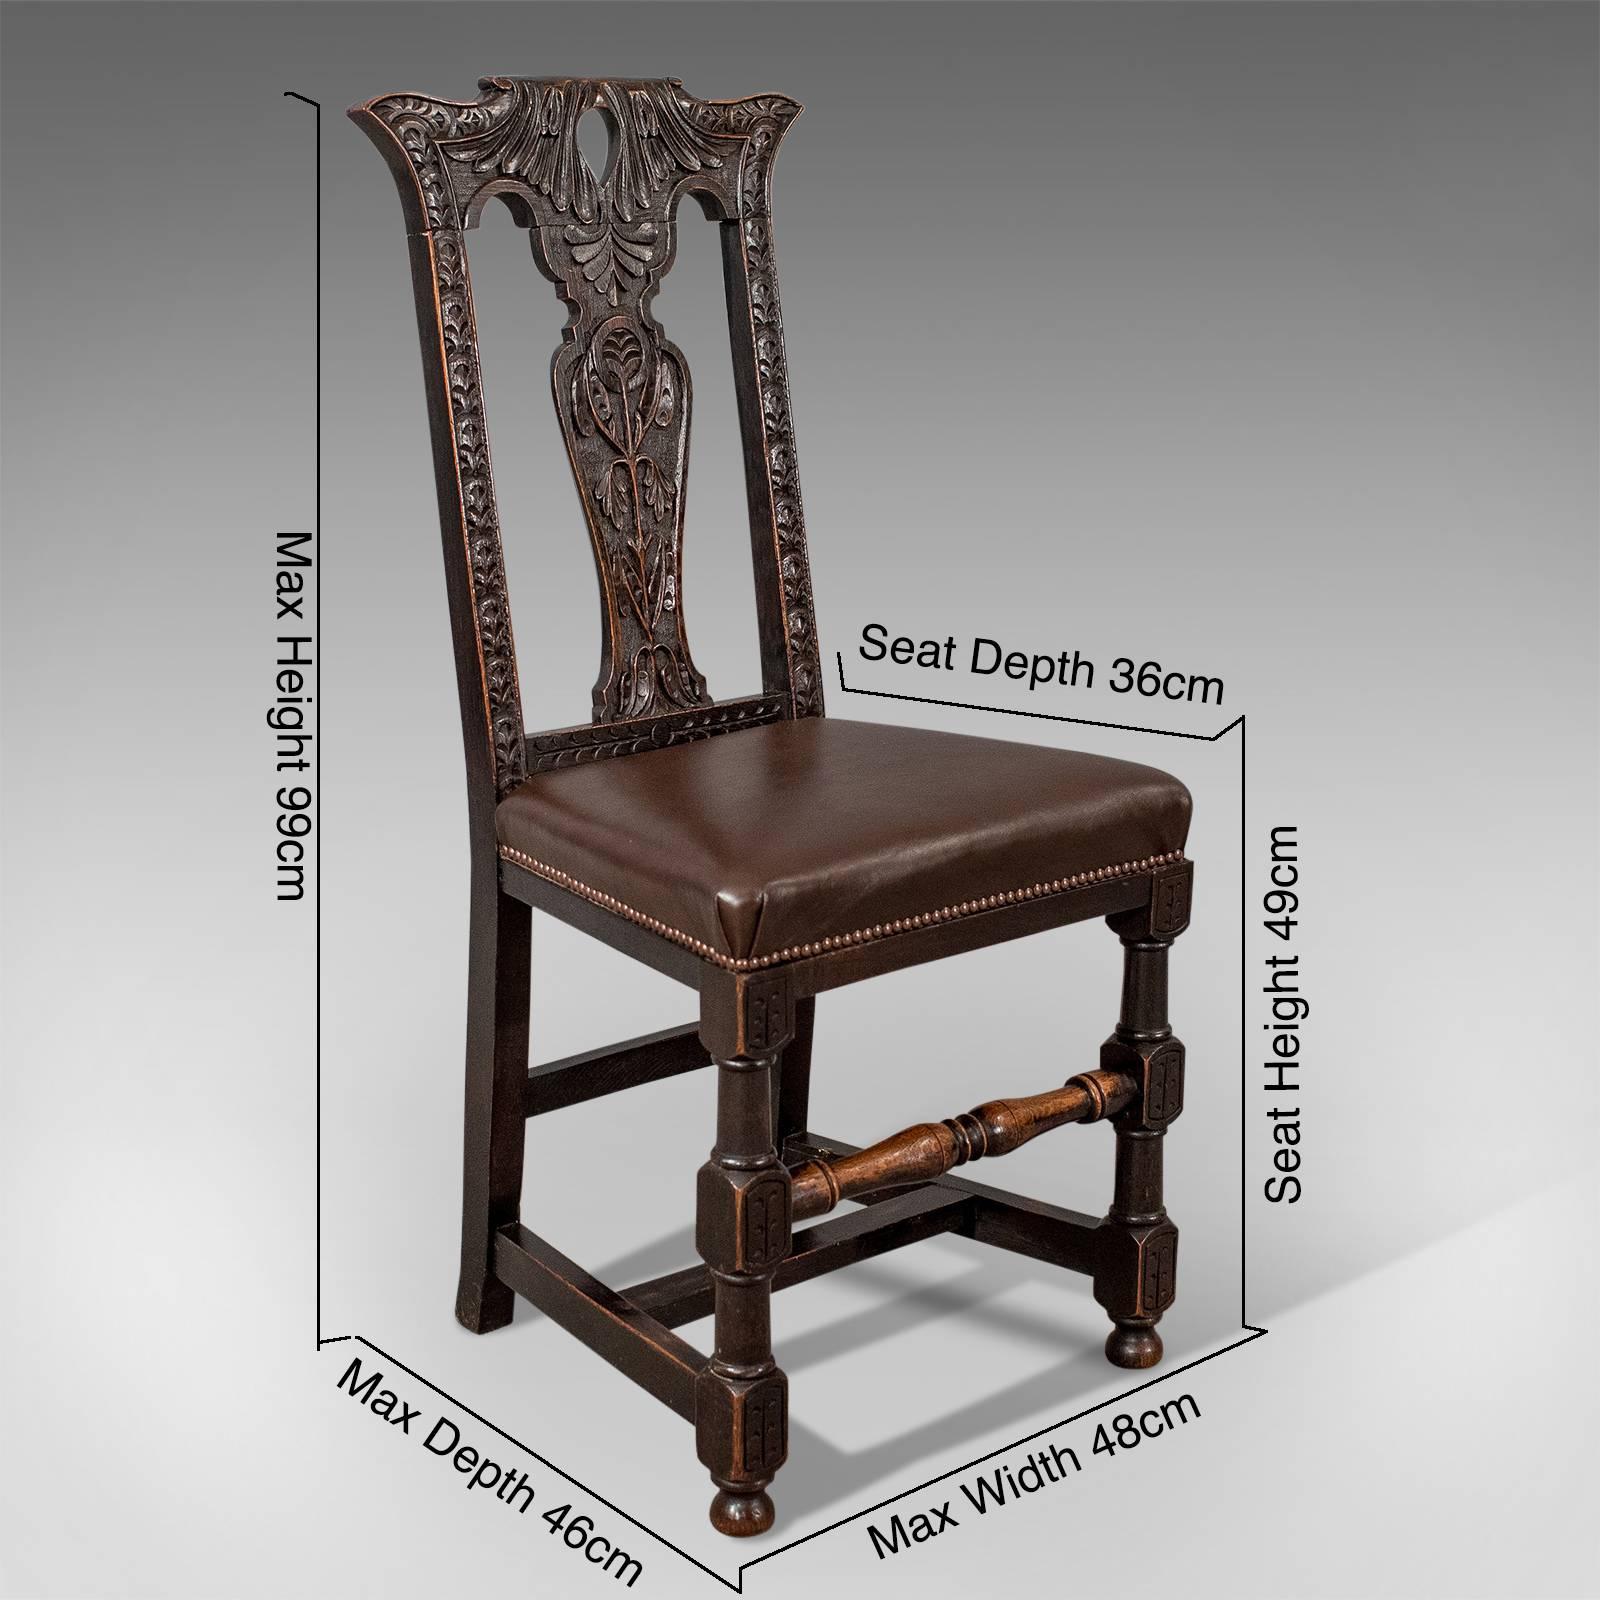 A most pleasing set of four chairs presented in good antique condition
With leather seats this well crafted set provides style and function
Delightfully carved back splat rising to a splayed upper with owls ears and butler's grasp
Generous in